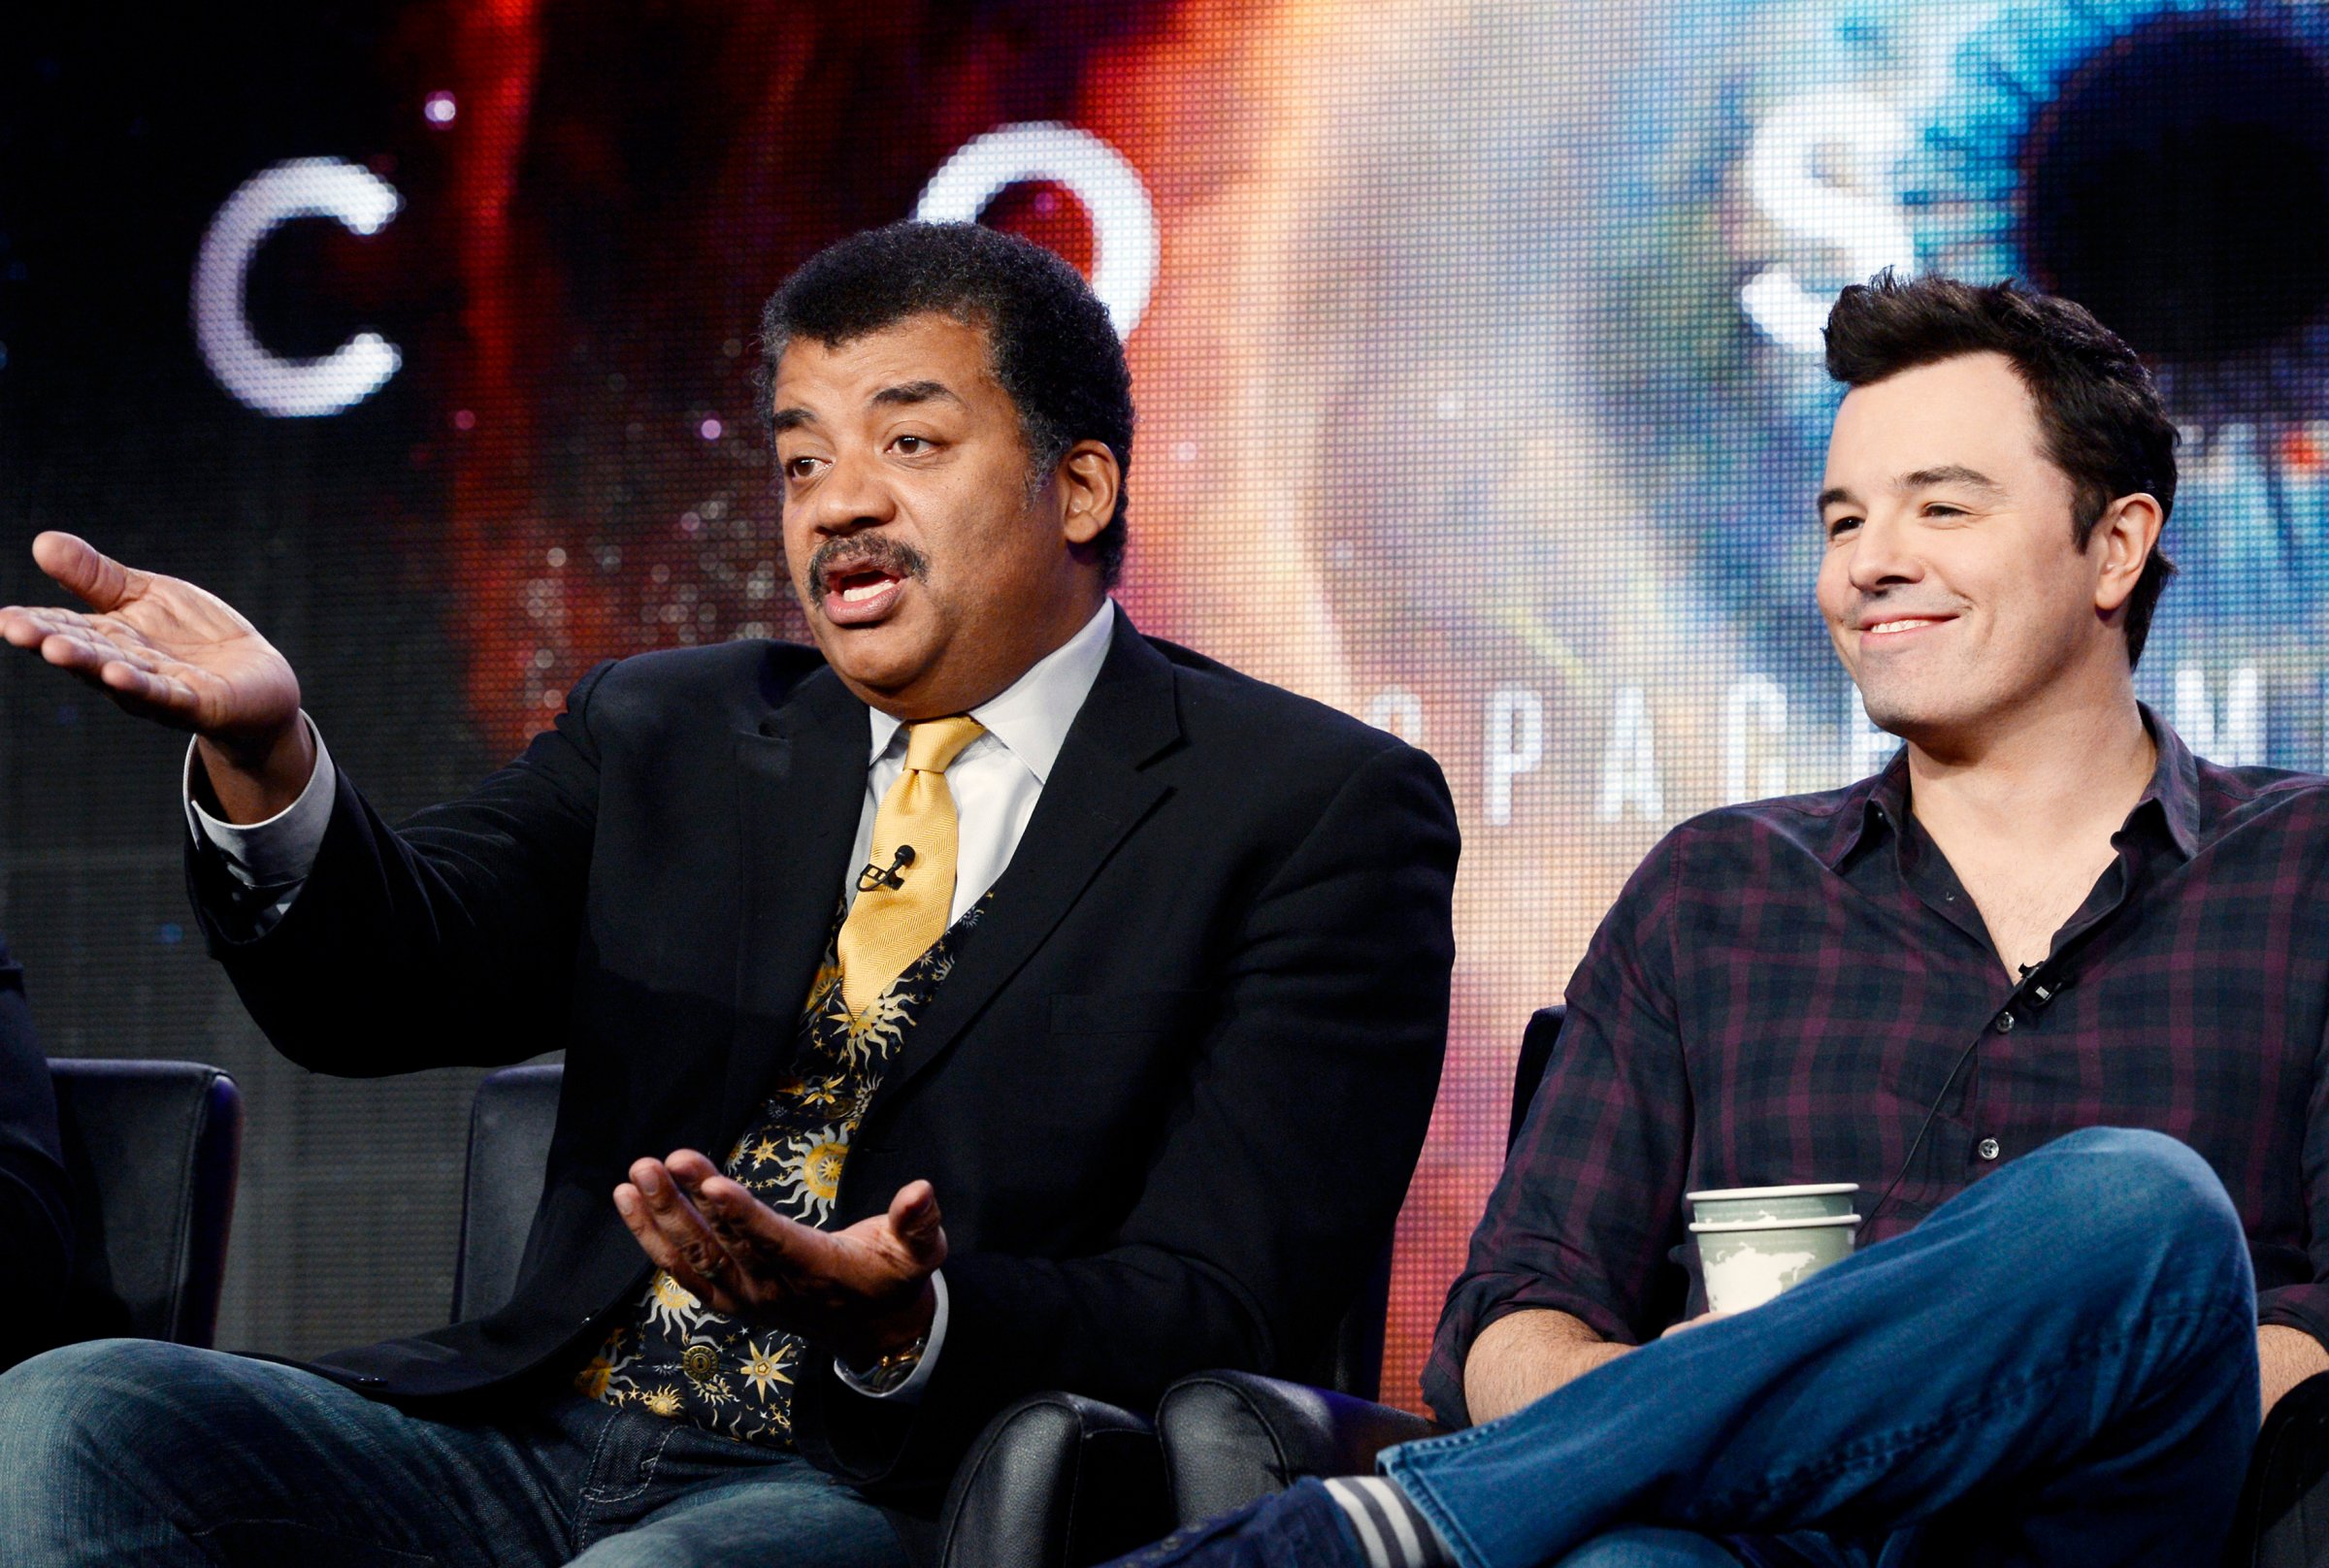 Host Neil DeGrasse Tyson and Seth MacFarlane, executive producer of "Cosmos", participate in Fox Broadcasting Company's part of the Television Critics Association (TCA) Winter 2014 presentations in Pasadena